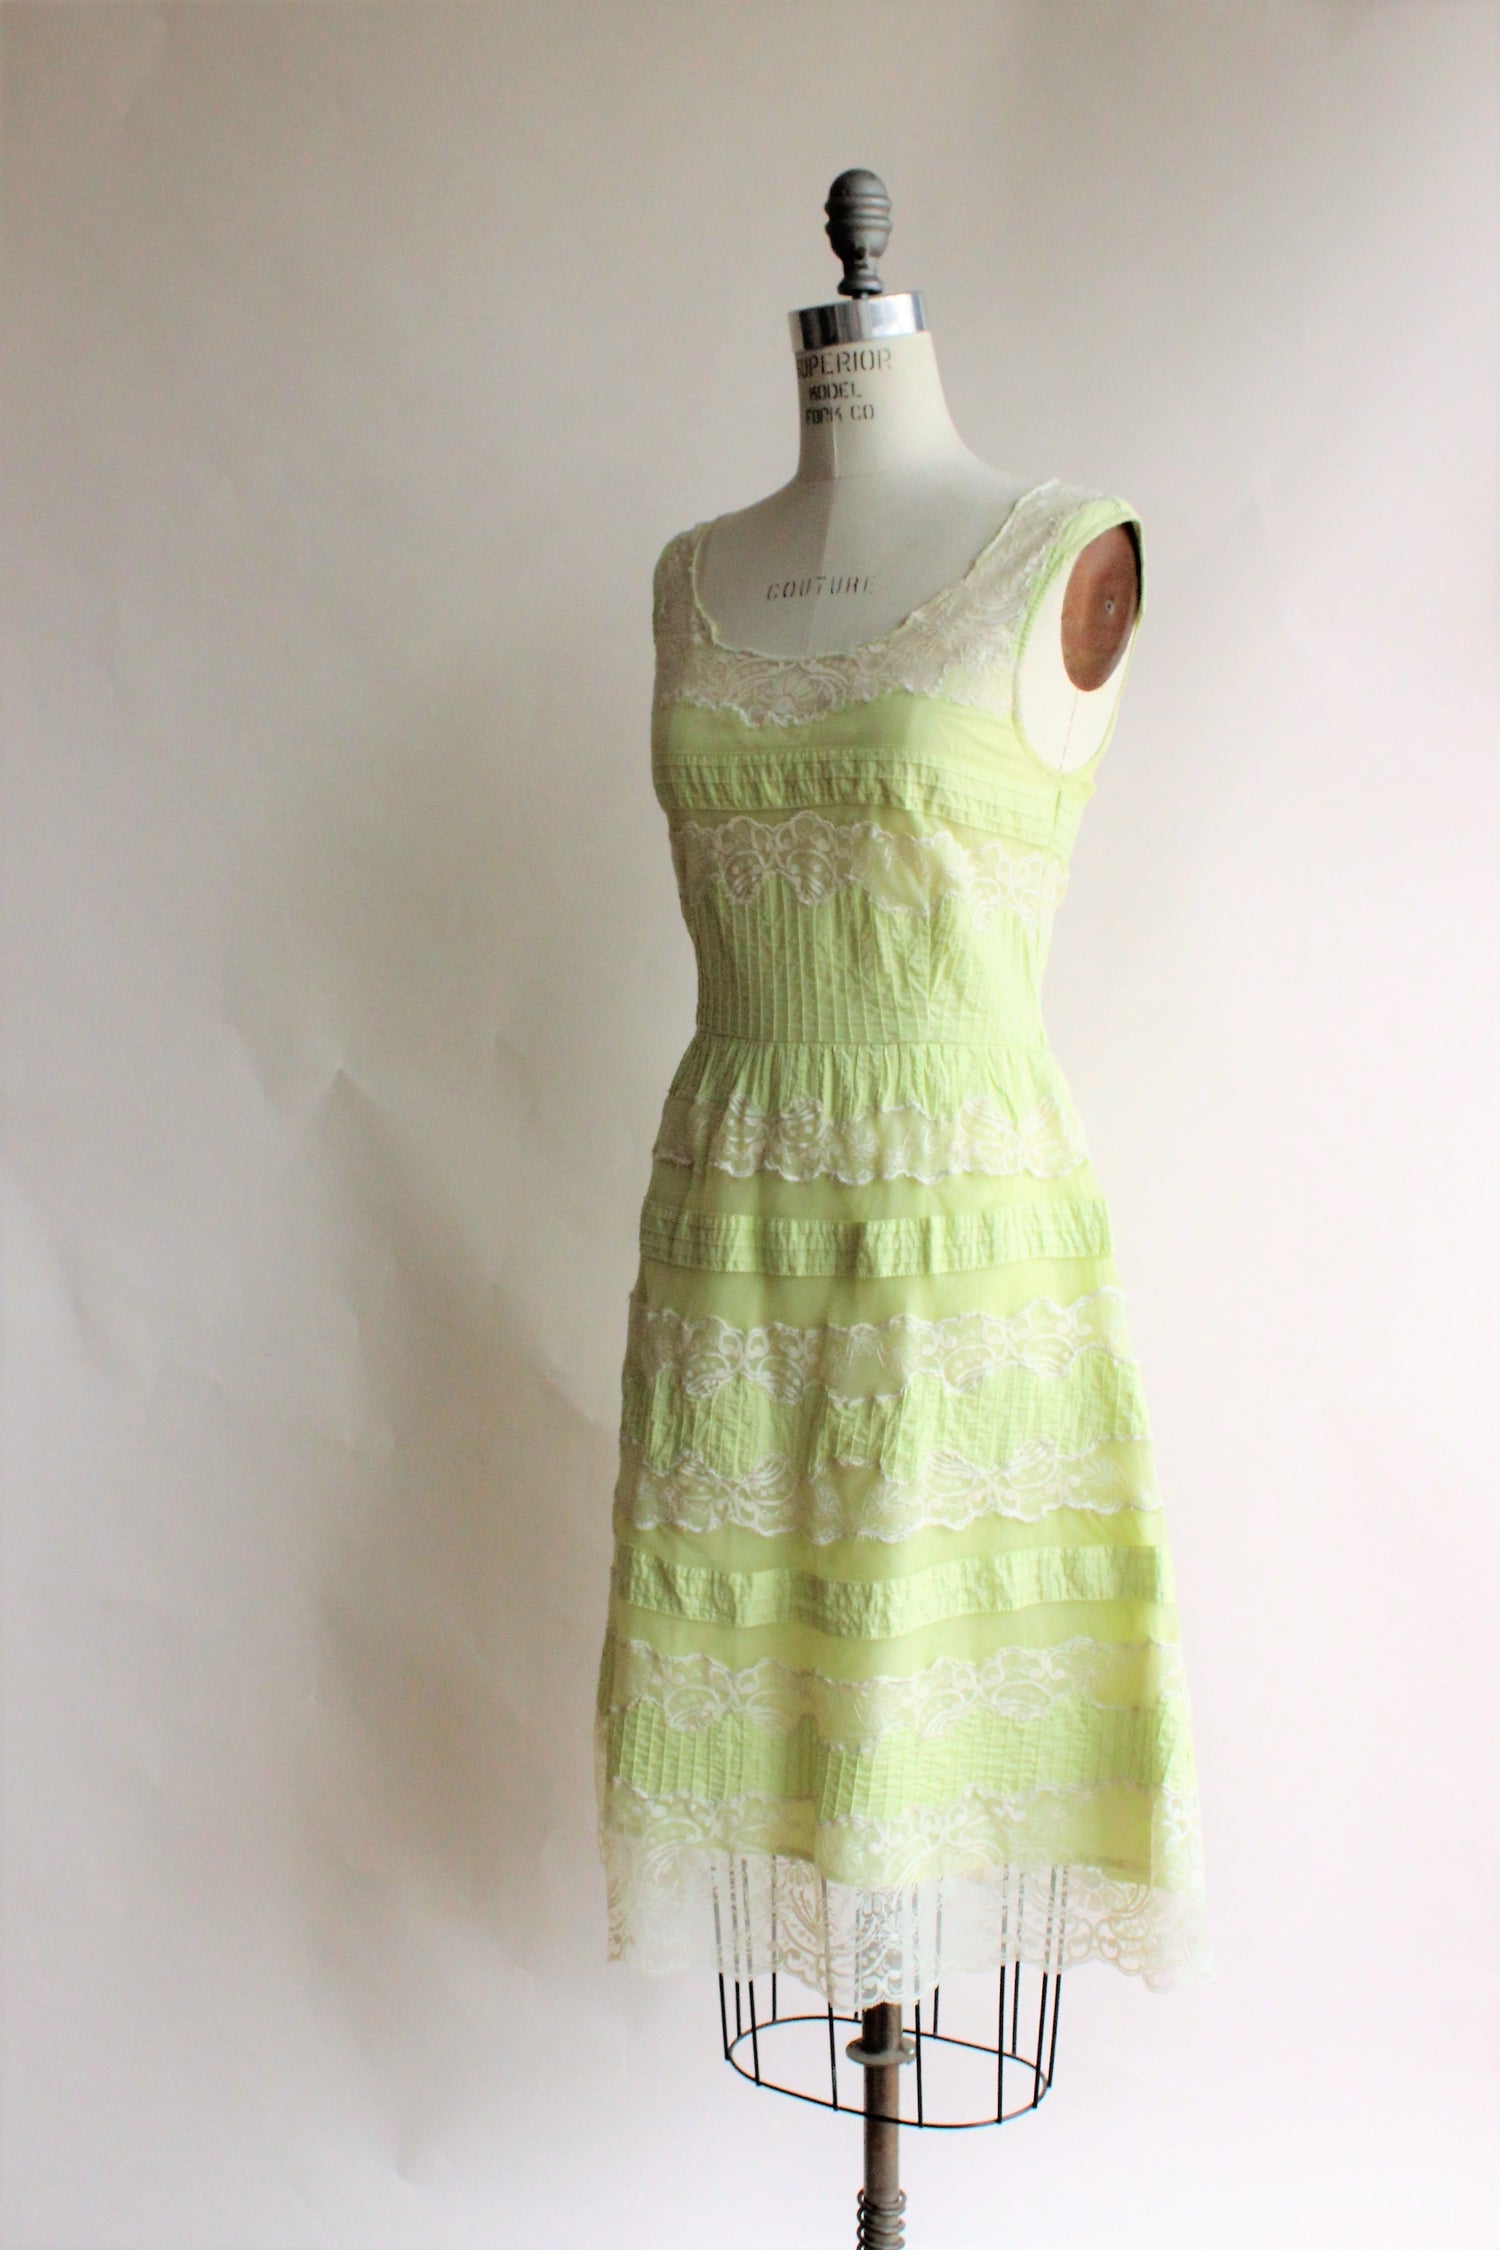 Lithe ( Anthropologie) in green with lace trim, Size 8